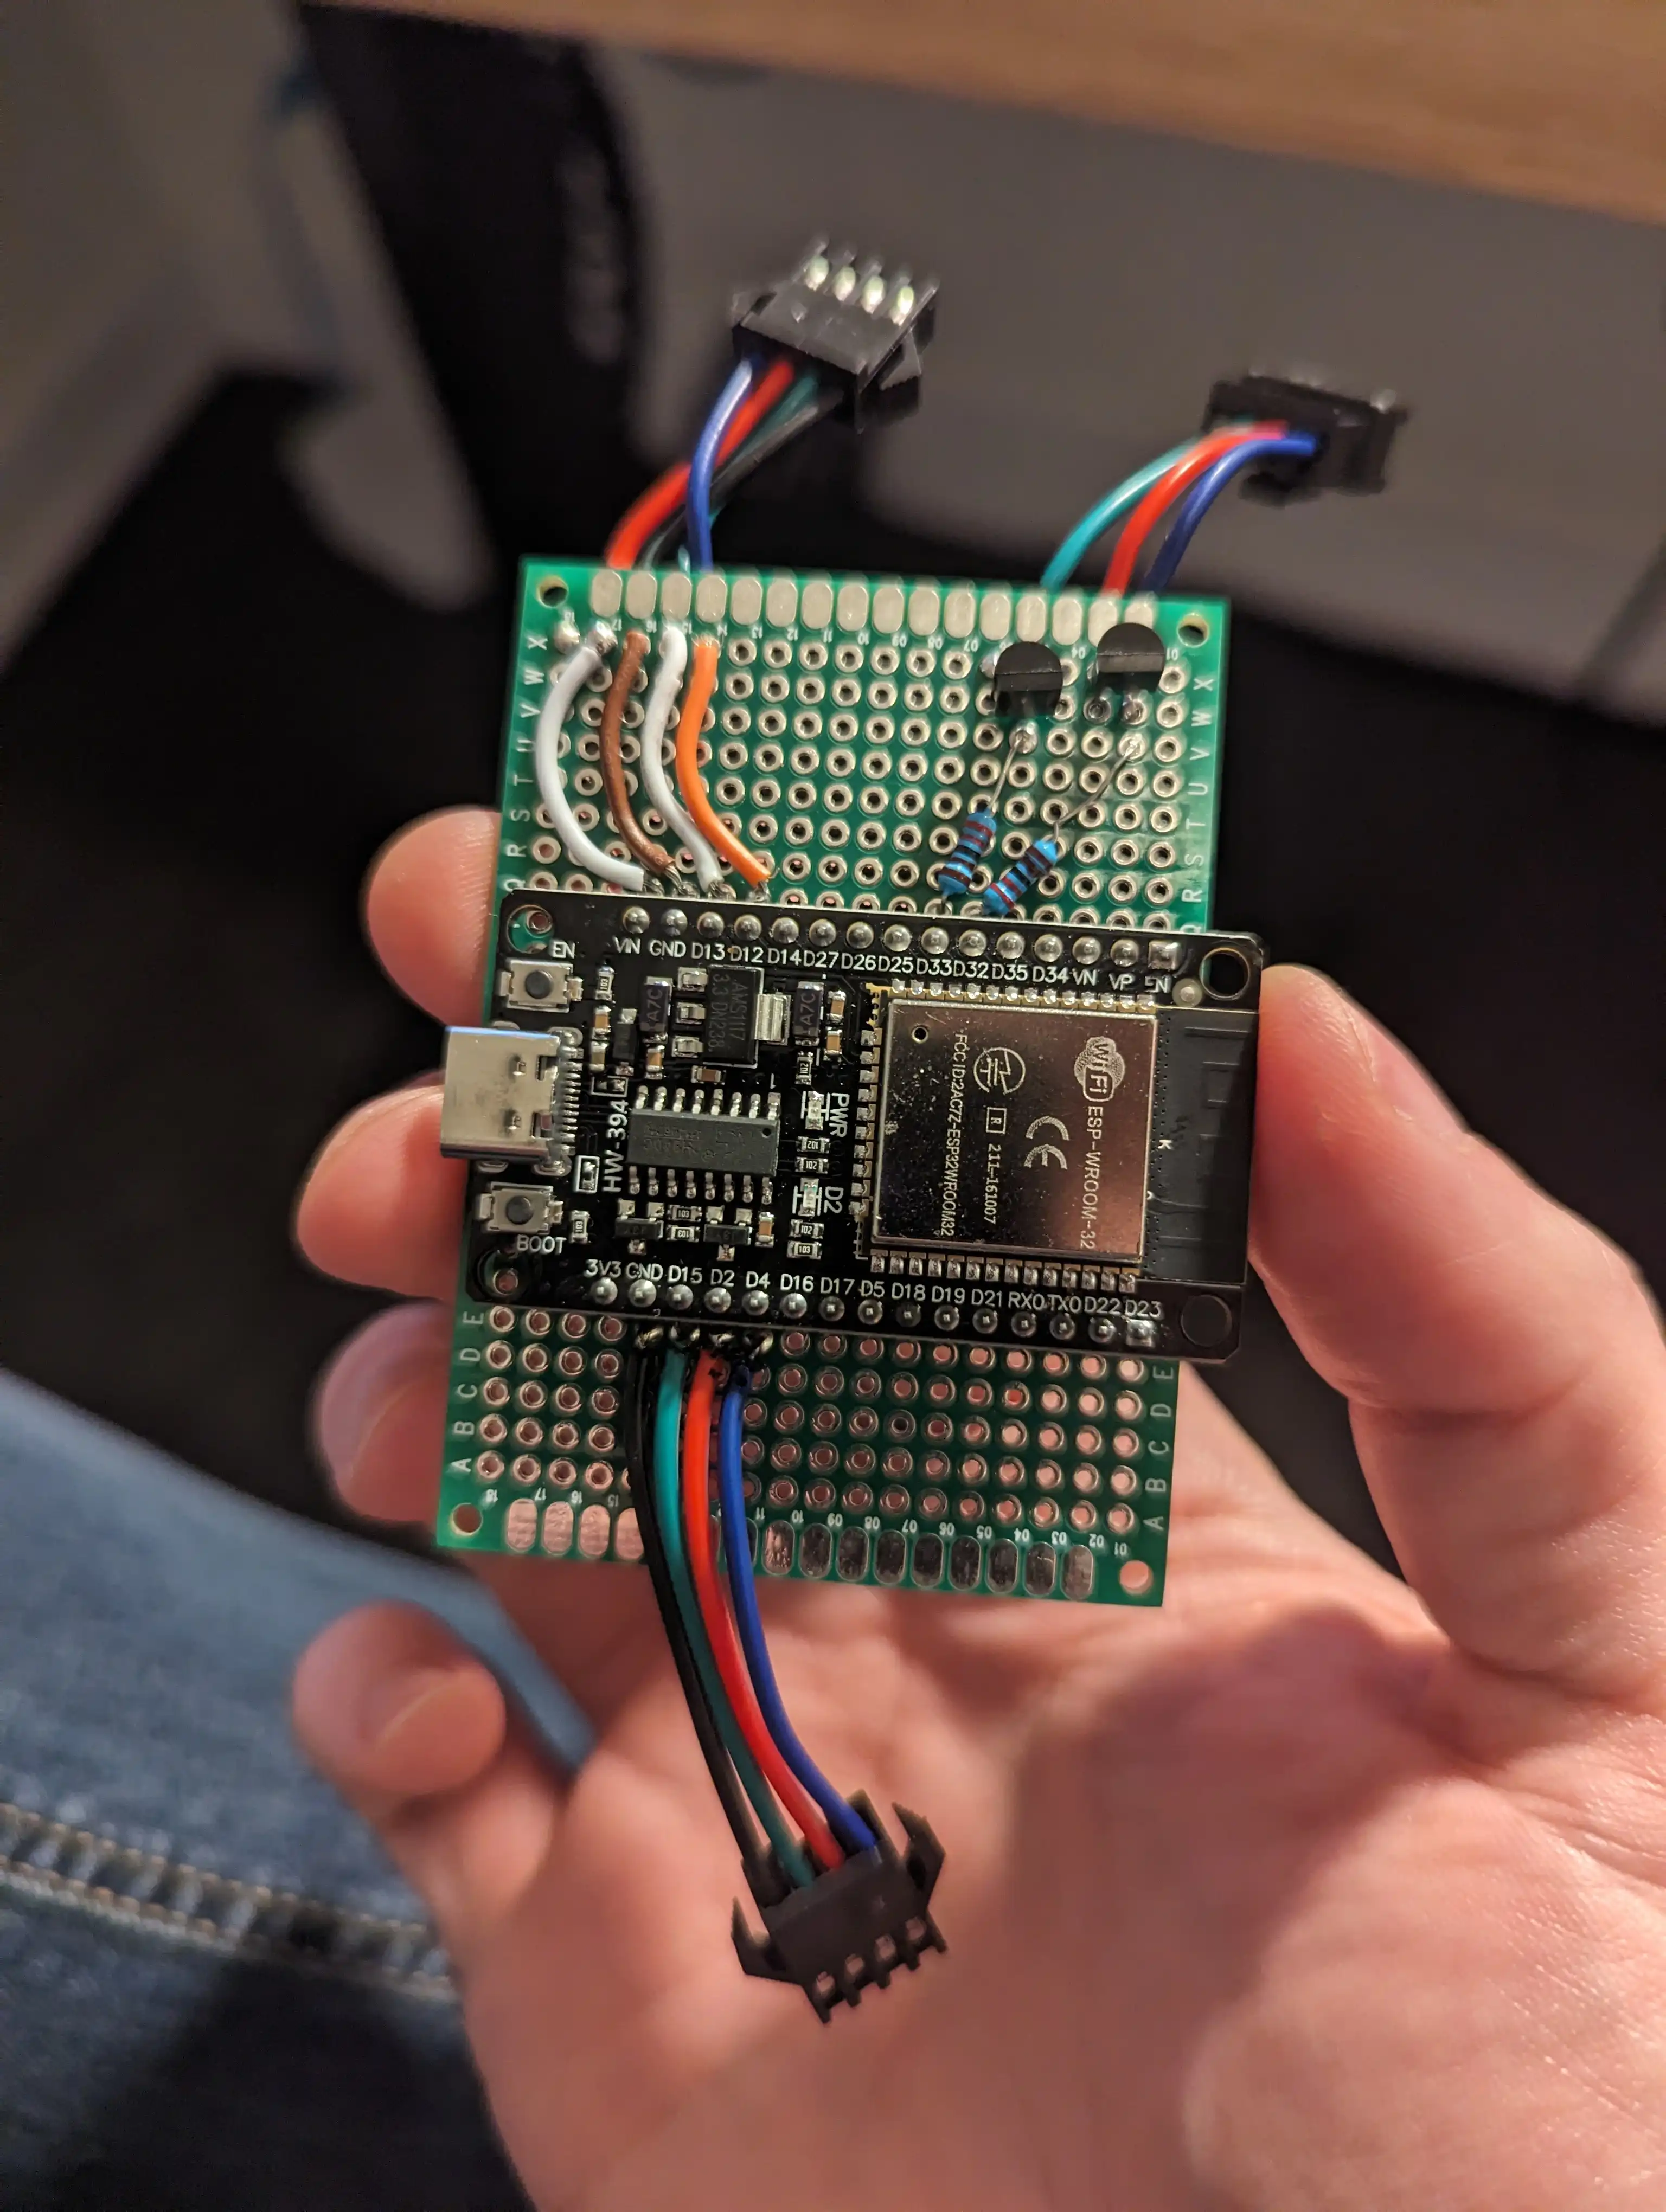 A photo of the front of a protoboard with the same wiring as the breadboard